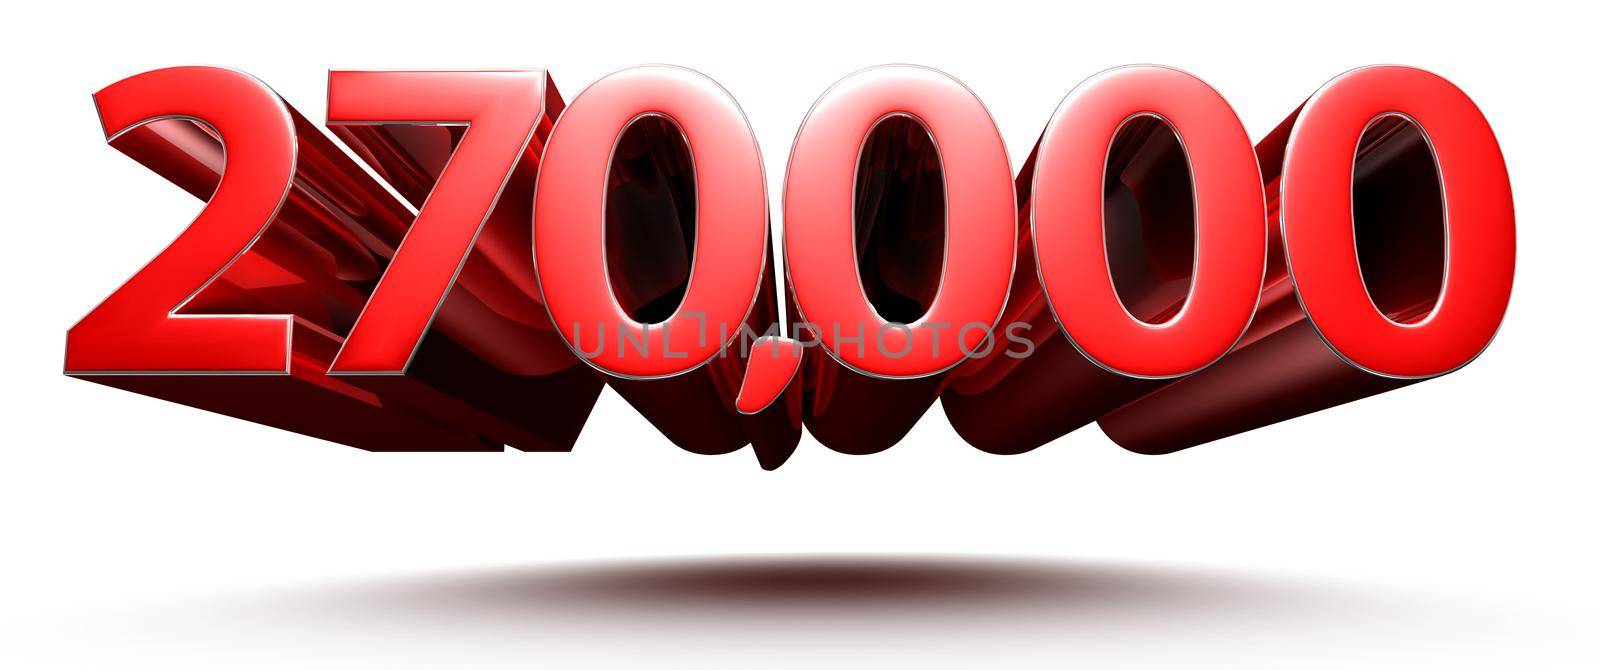 Red numbers 270000 isolated on white background illustration 3D rendering with clipping path.